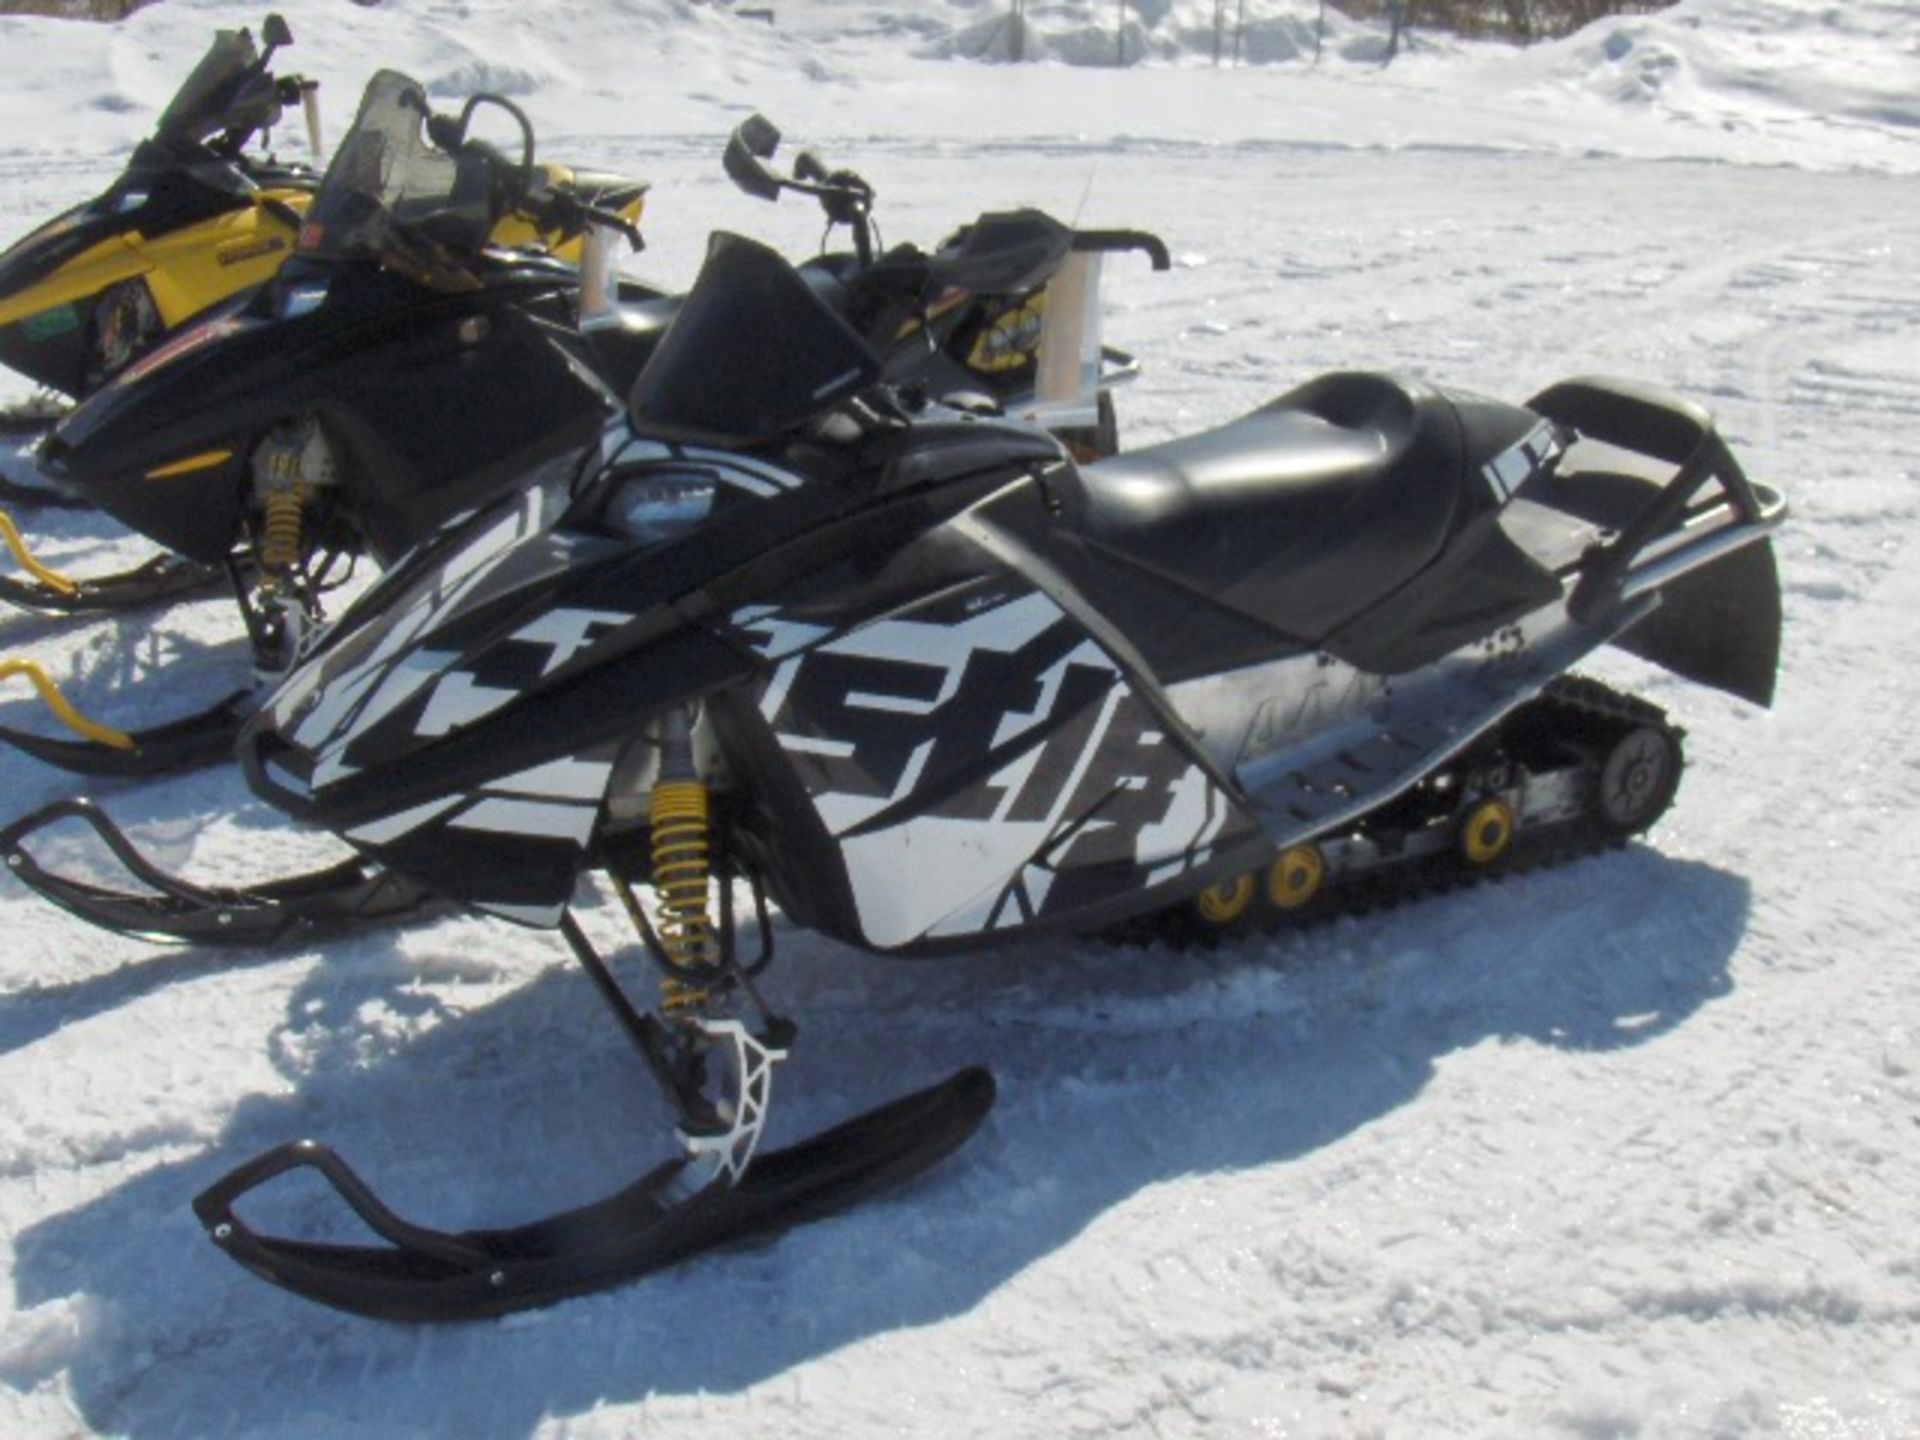 2003 SKI-DOO 800 REV 800 MXZ 2BPS226843V001102 Snowmobile, sold with a bill of sale only